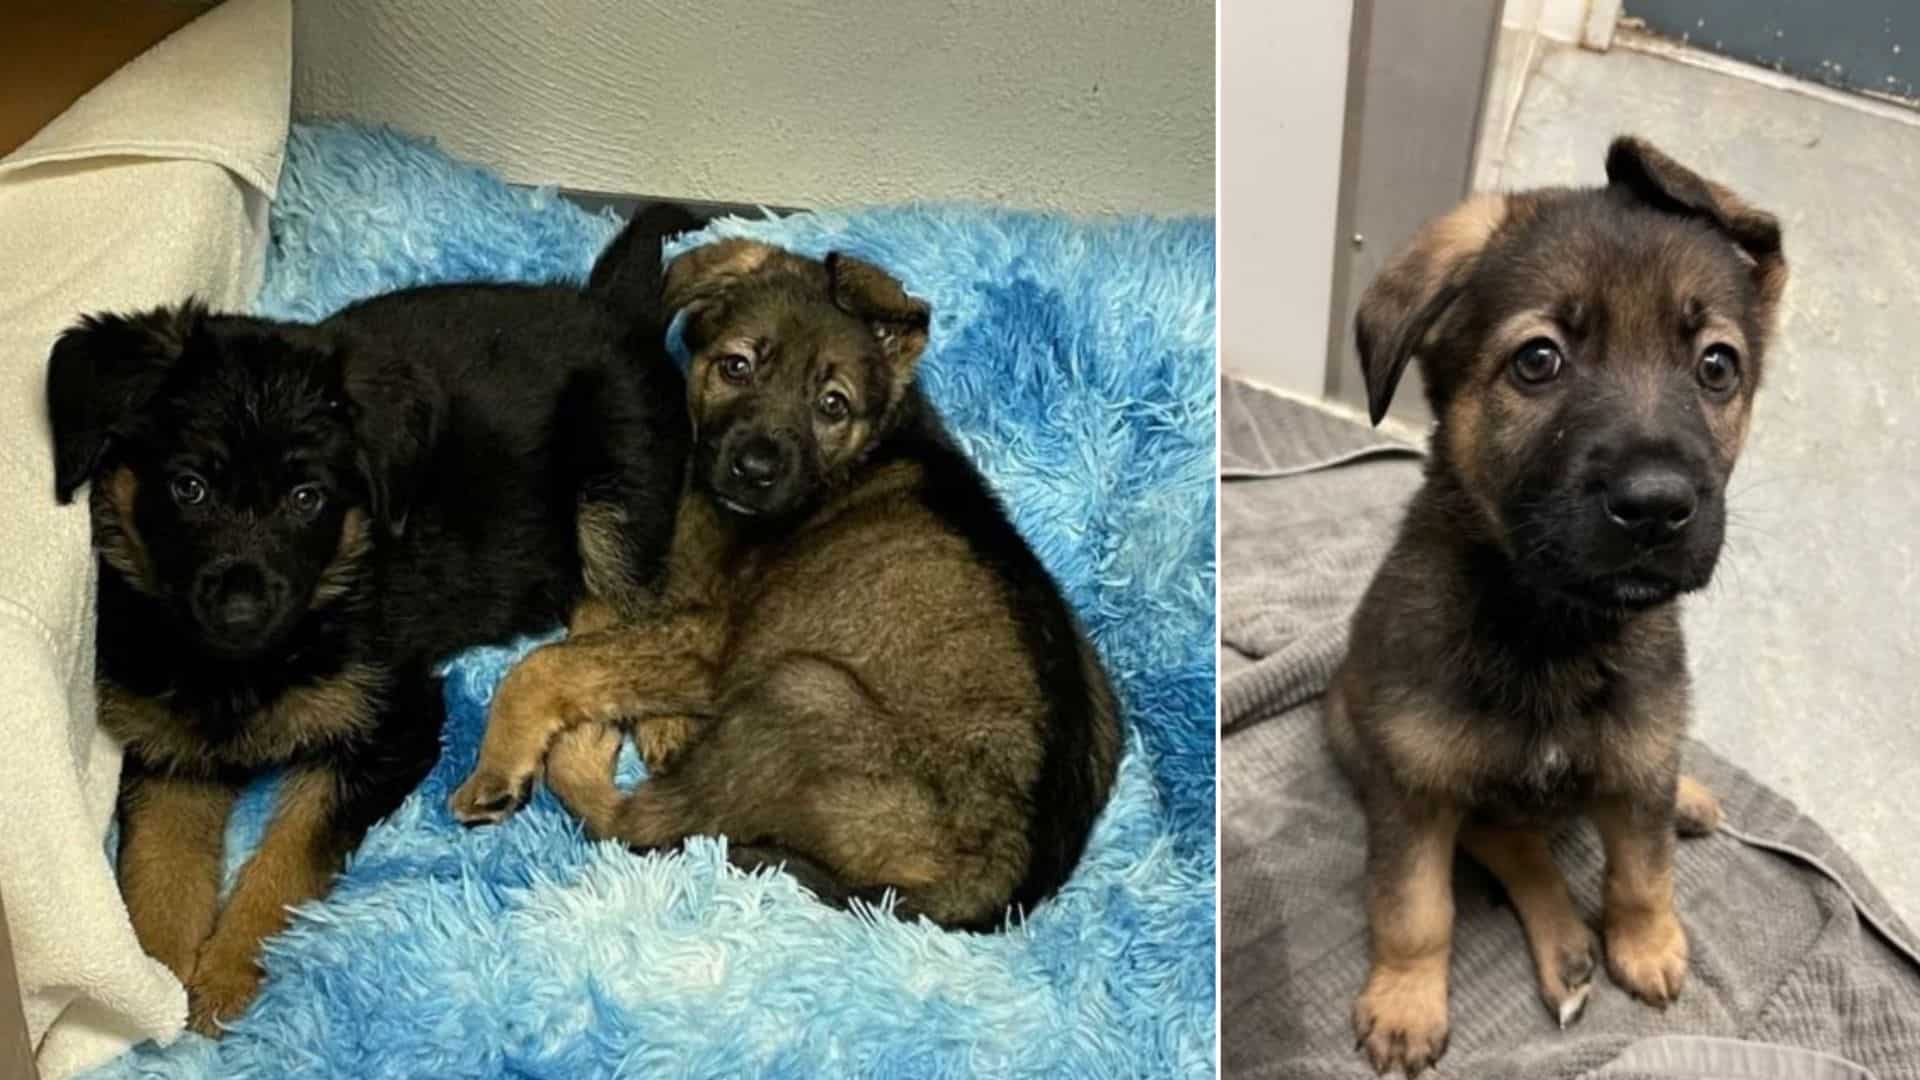 Two 6-Week-Old German Shepherd Puppies Found Abandoned In A Box In Bushes